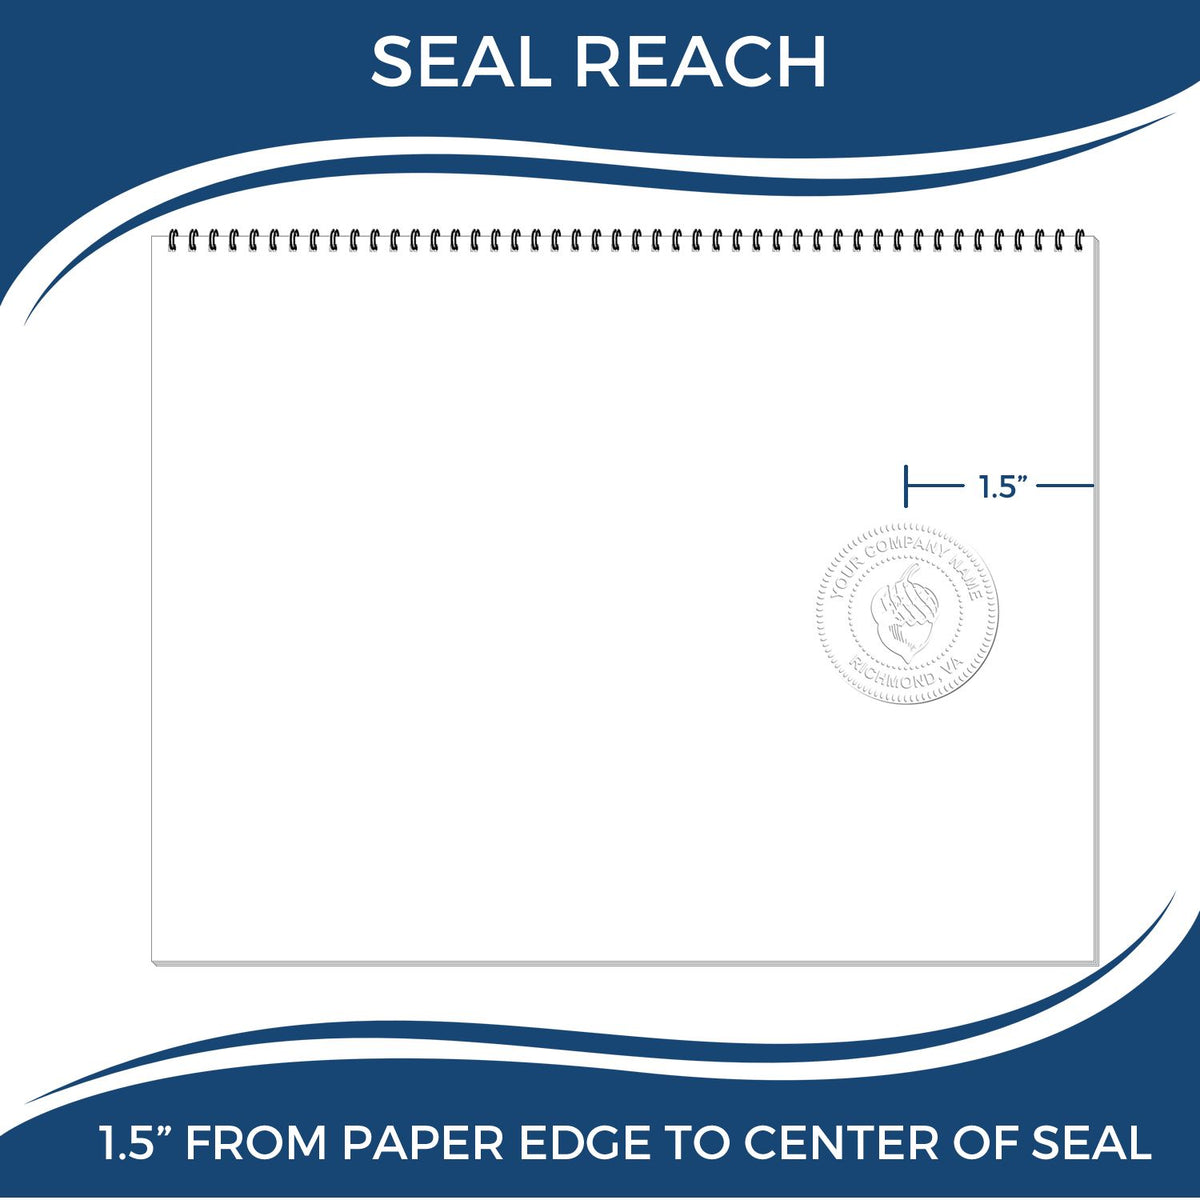 An infographic showing the seal reach which is represented by a ruler and a miniature seal image of the Gift District of Columbia Architect Seal